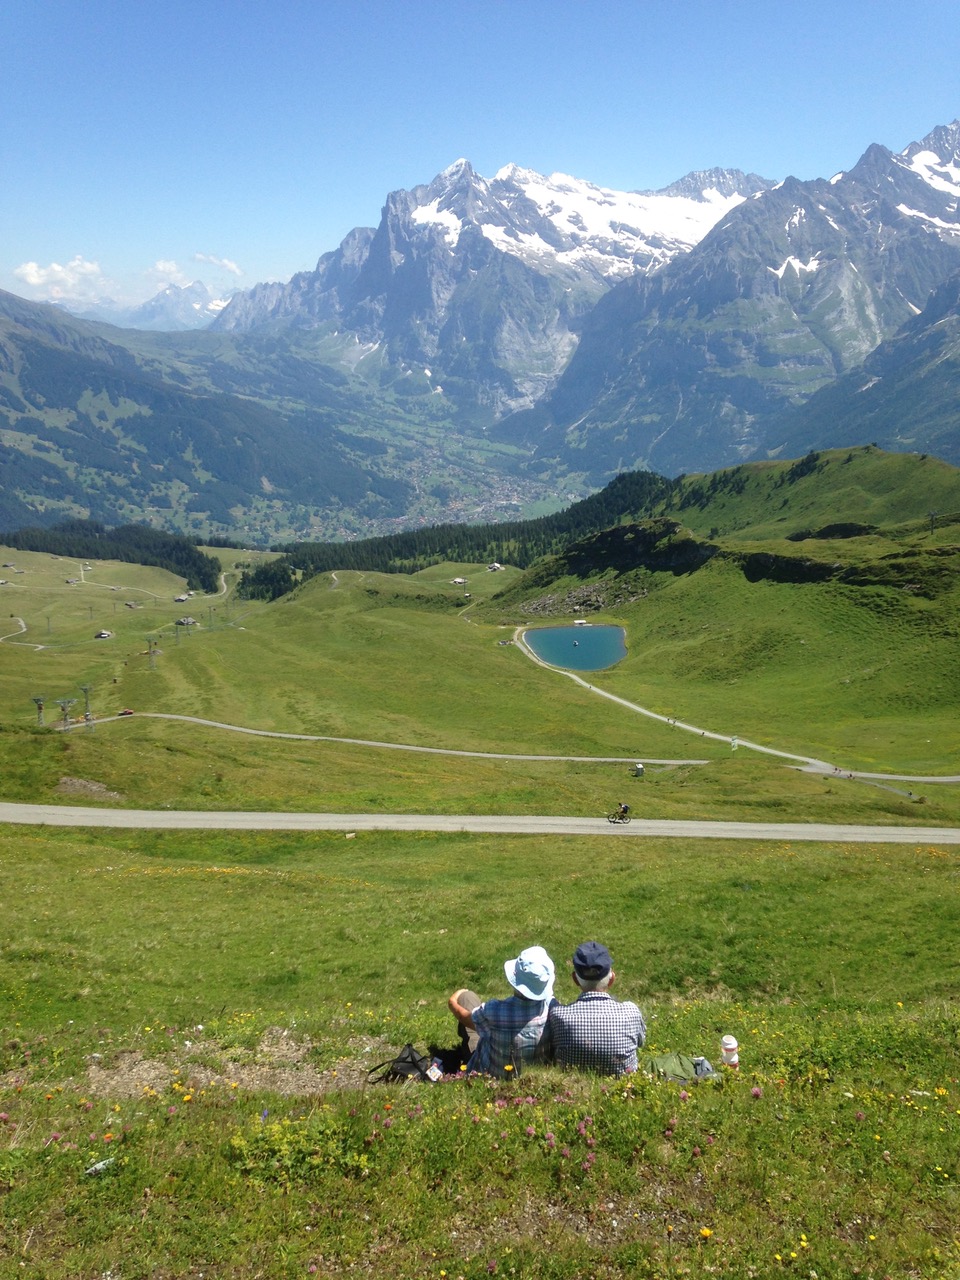 Glorious vistas and places to stop and picnic, from a trail near Wengen. Grindelwald in the distance.